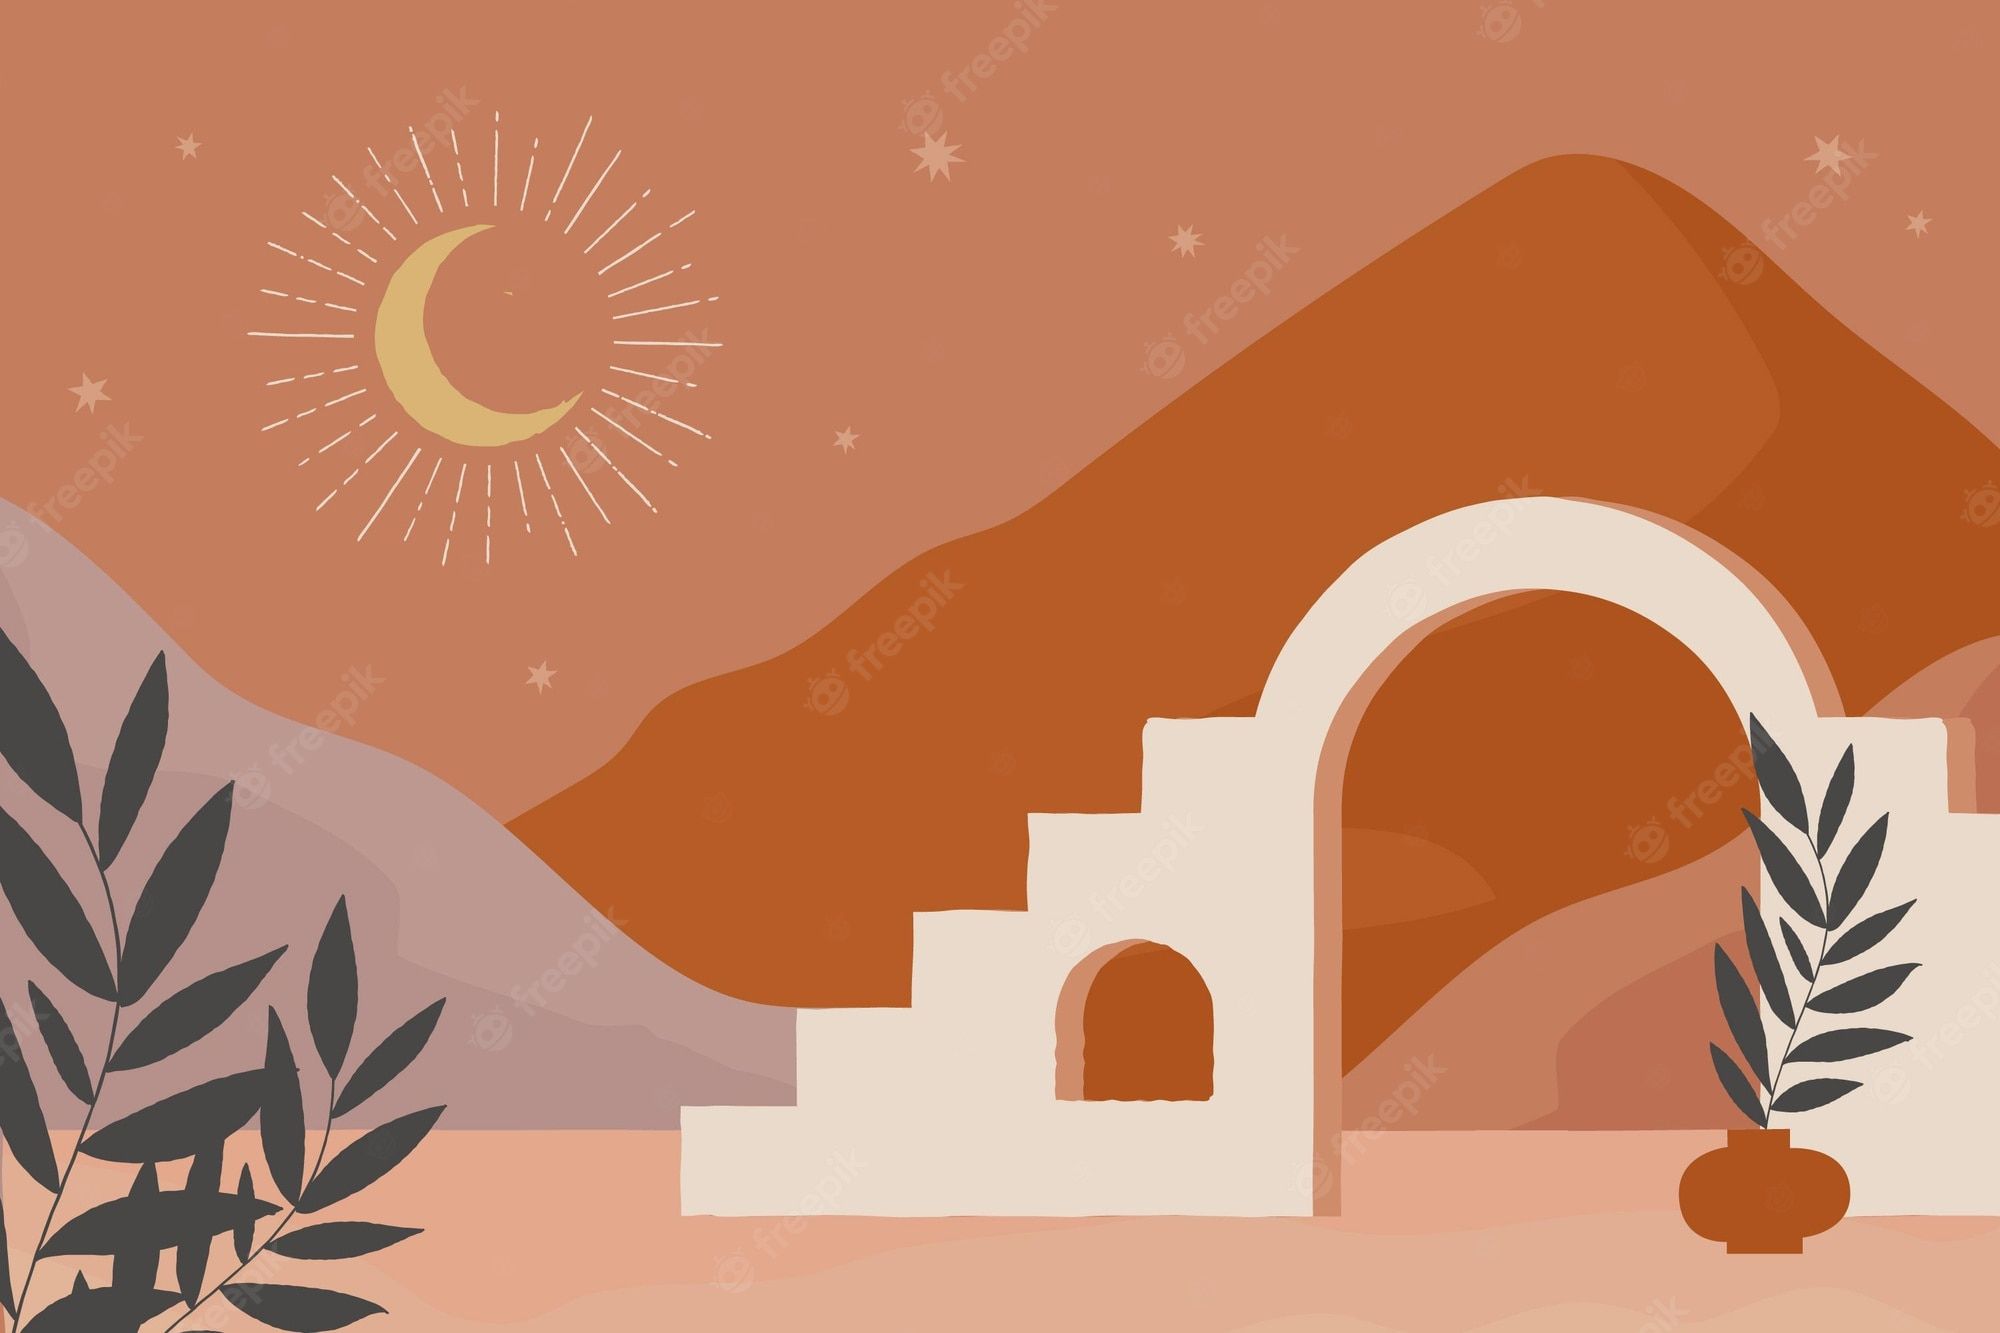 A desert scene with an archway, mountains, the moon and stars - Boho